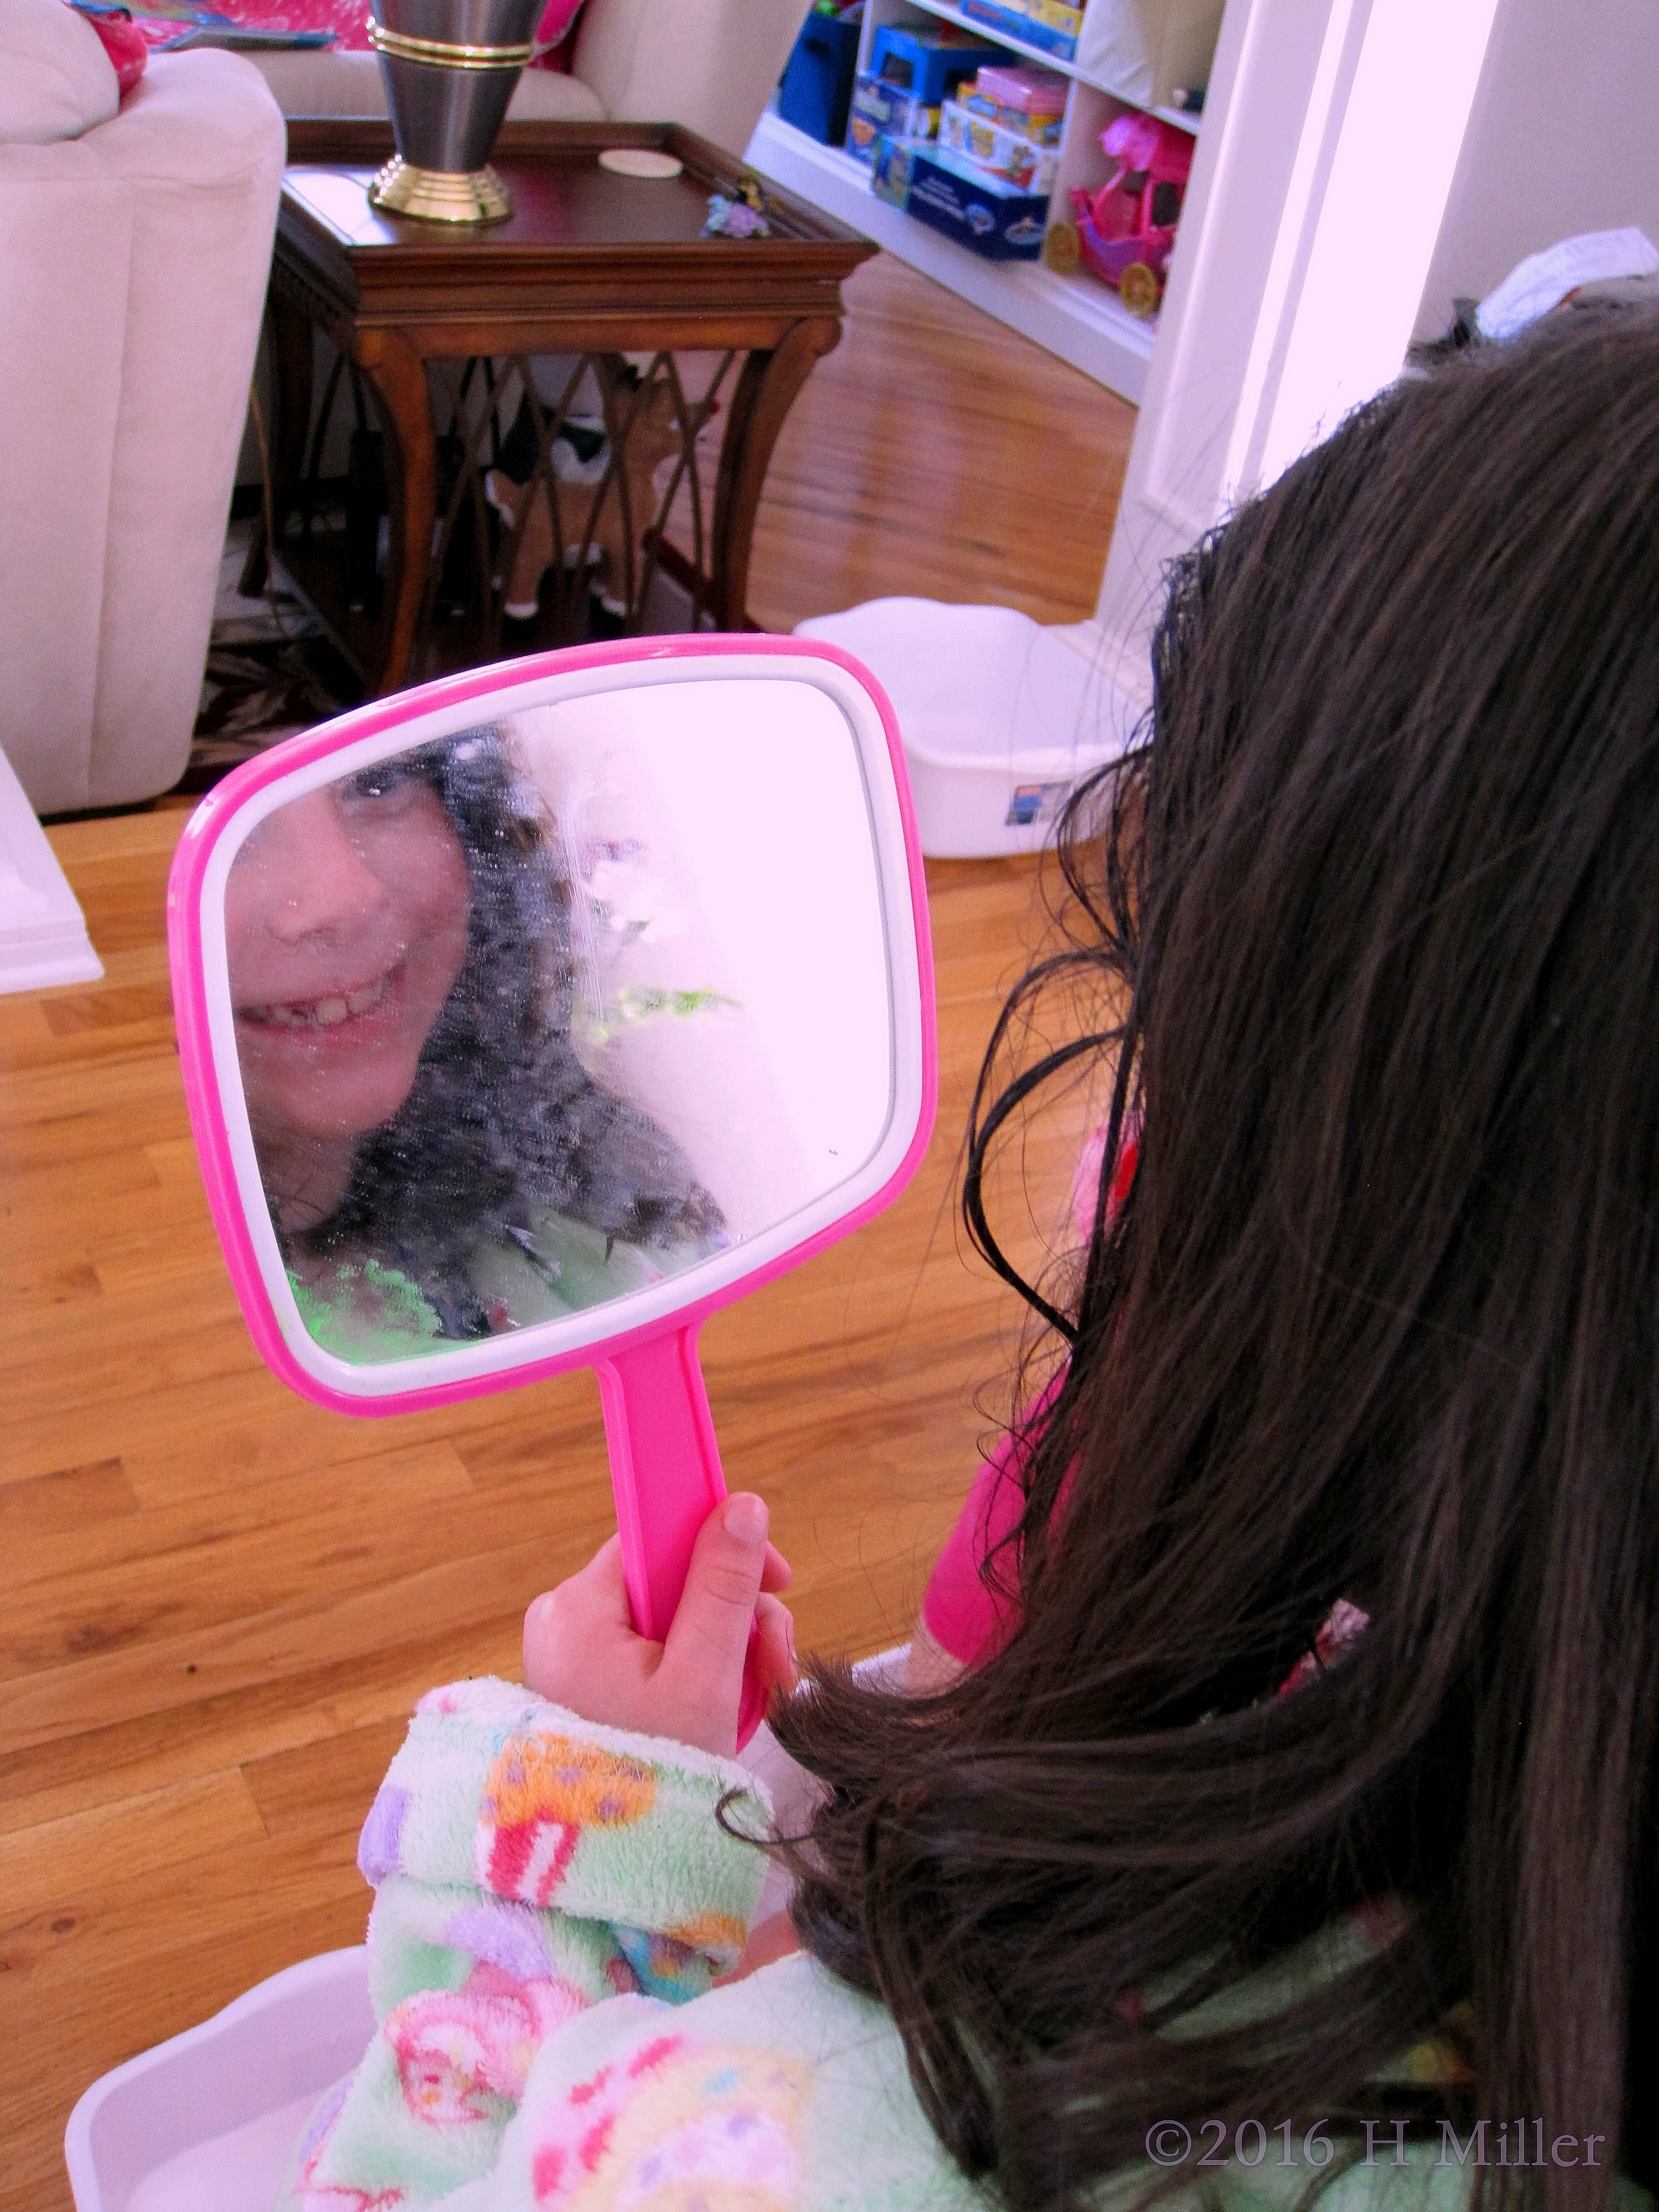 Checking Out Her Kids Hairstyle In The Mirror!